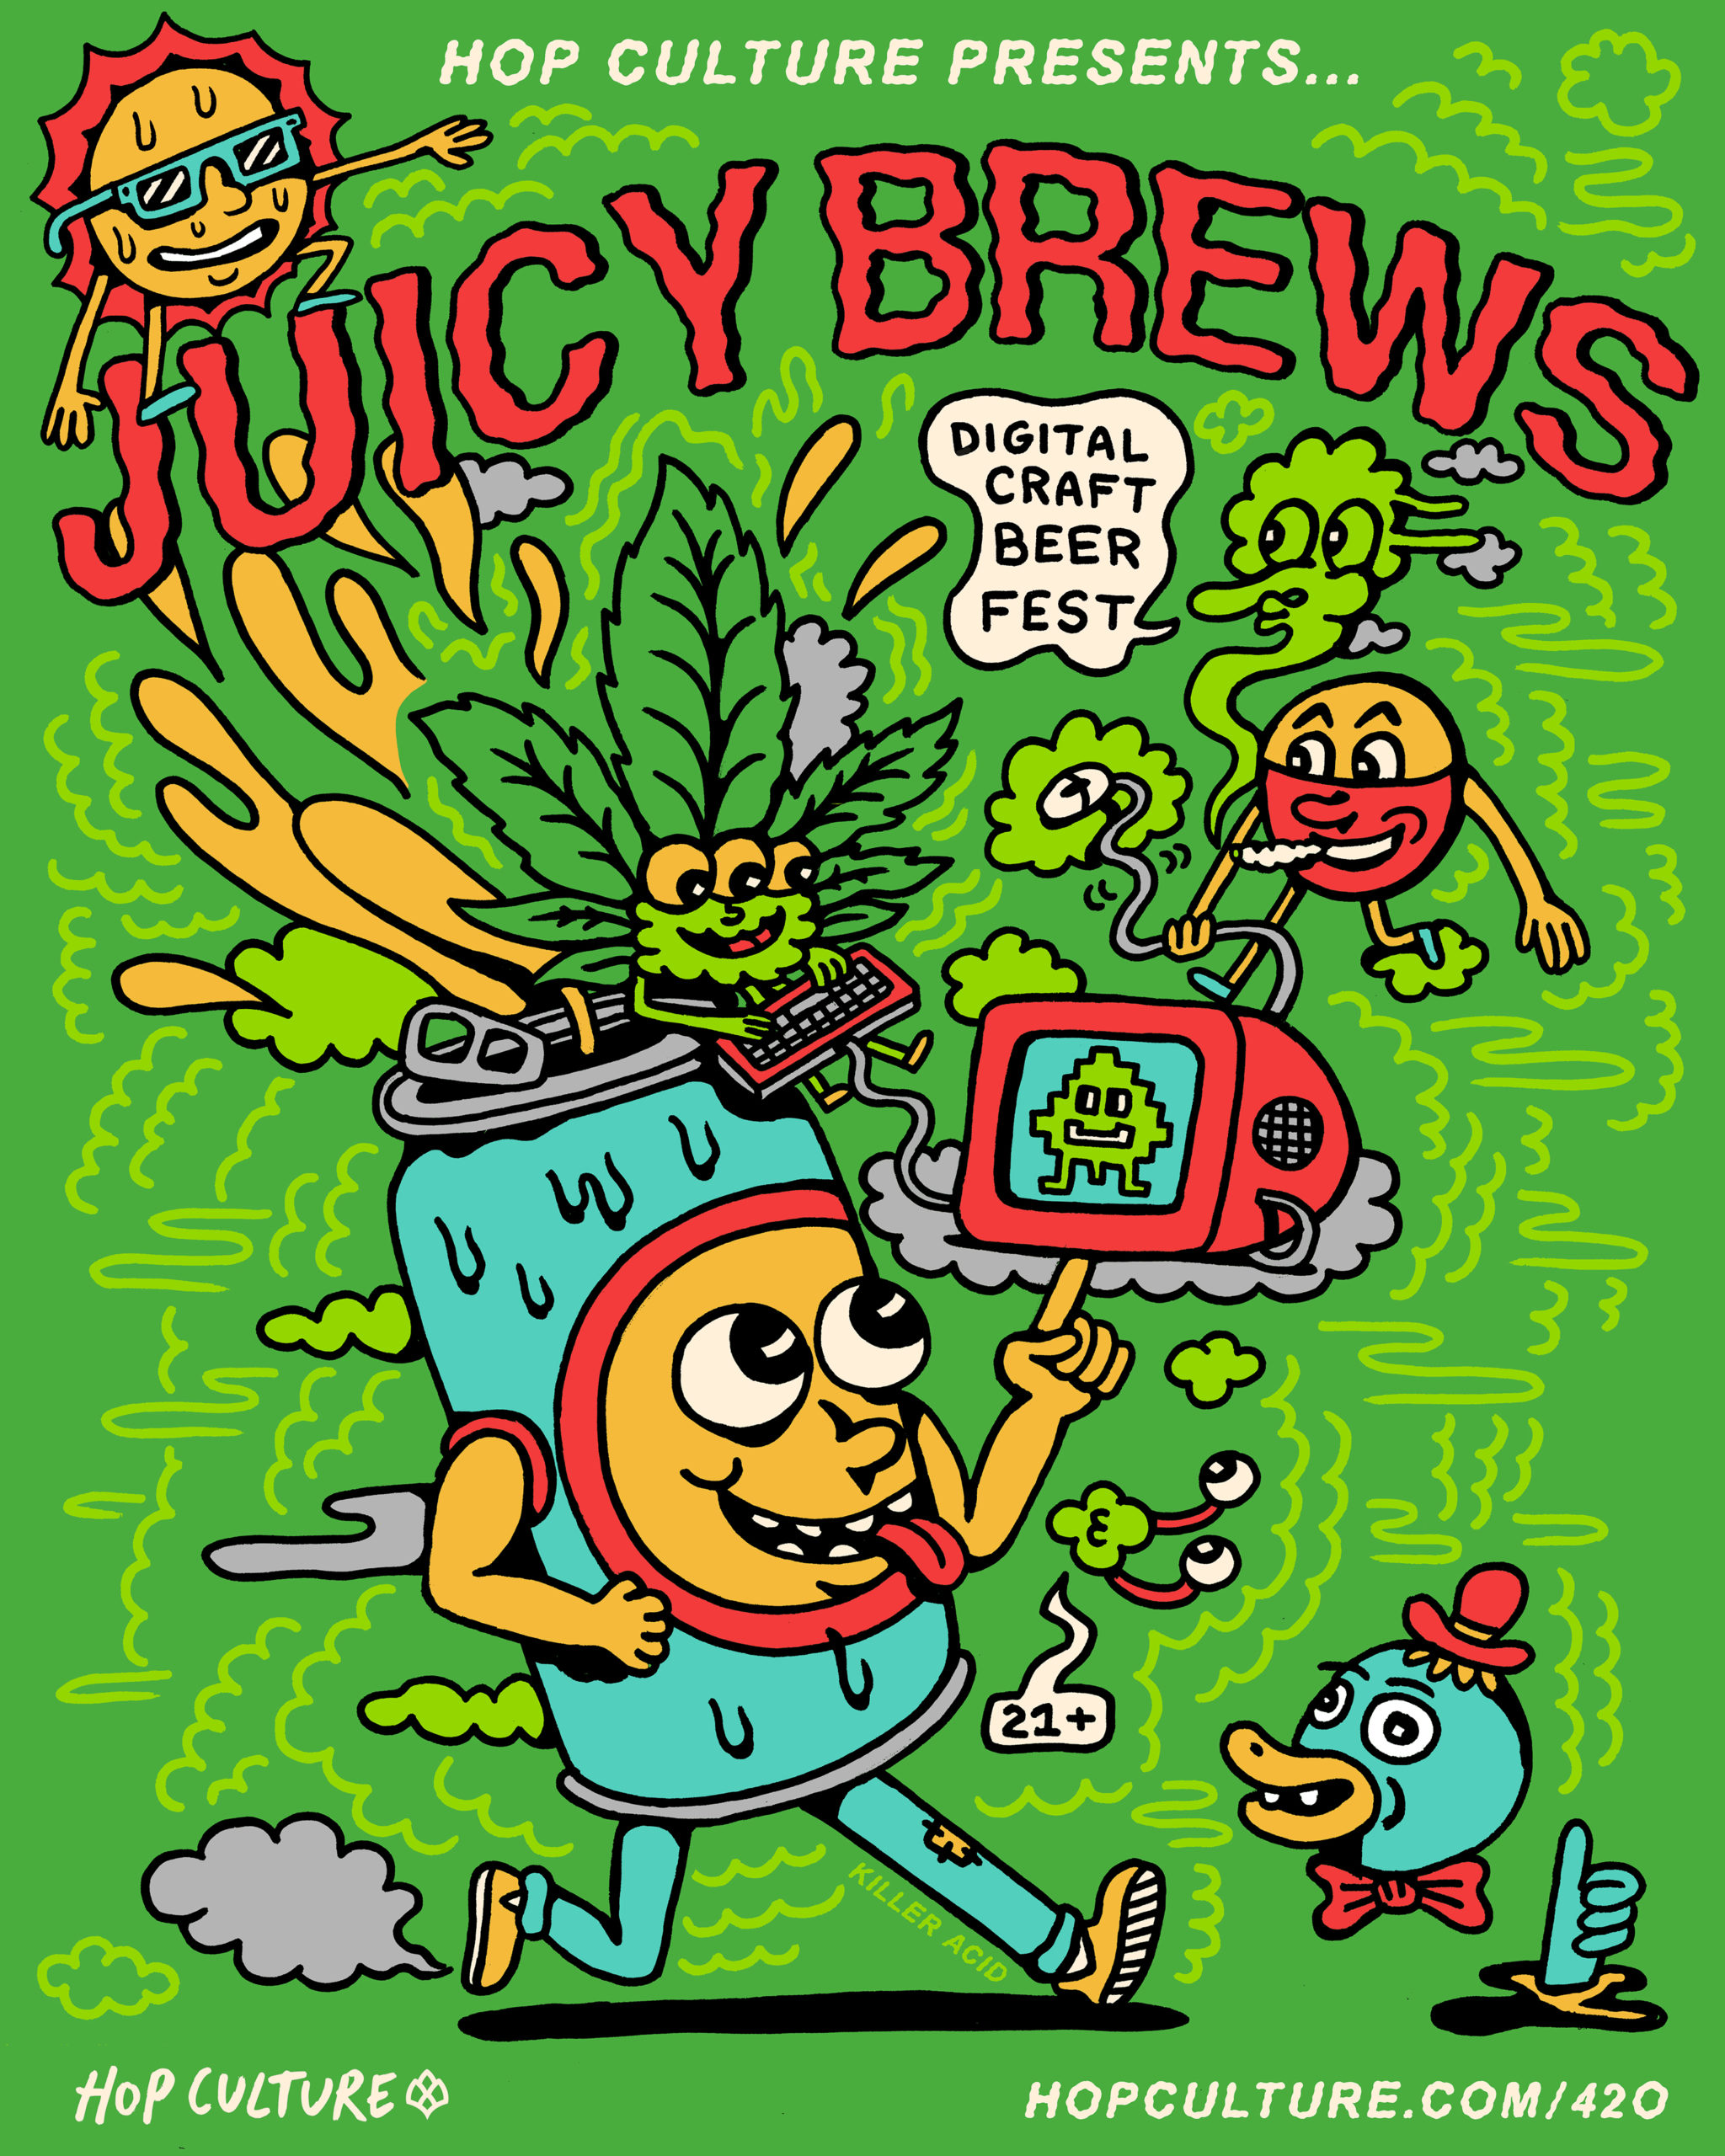 Everything You Need to Know About Juicy Brews 420 Digital Craft Beer Festival